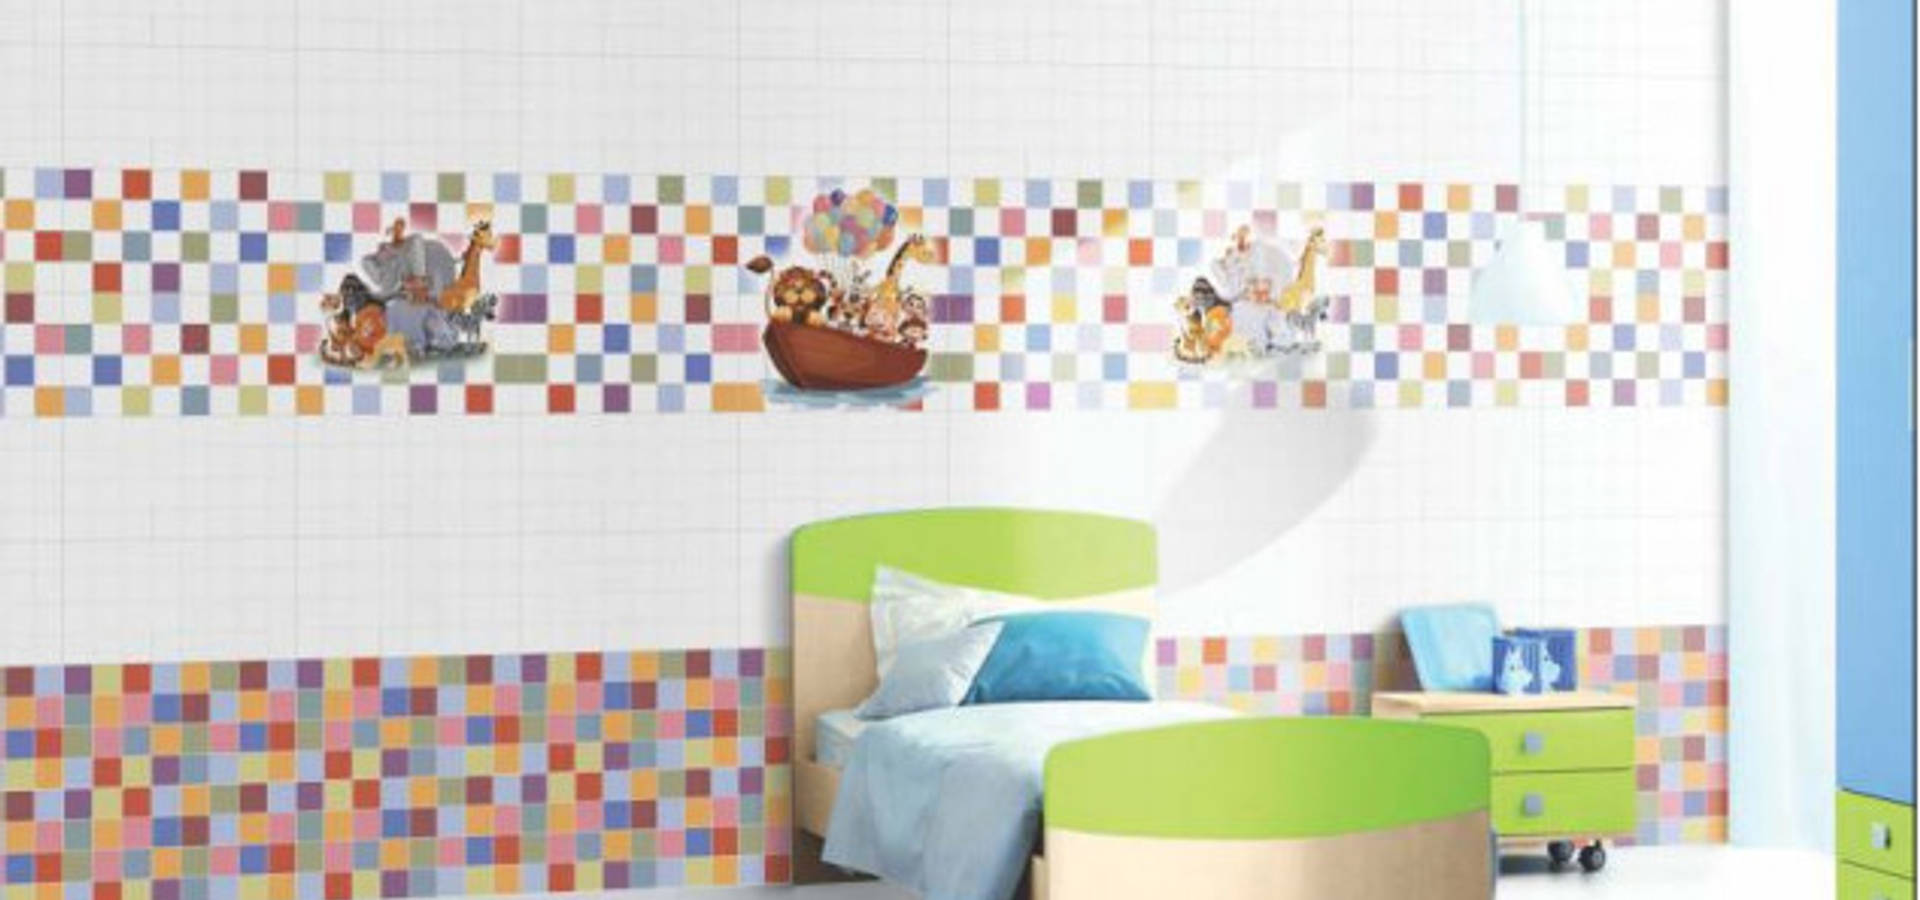 Somany Ceramics  Premium Tiles Manufacturer for Wall And Floor